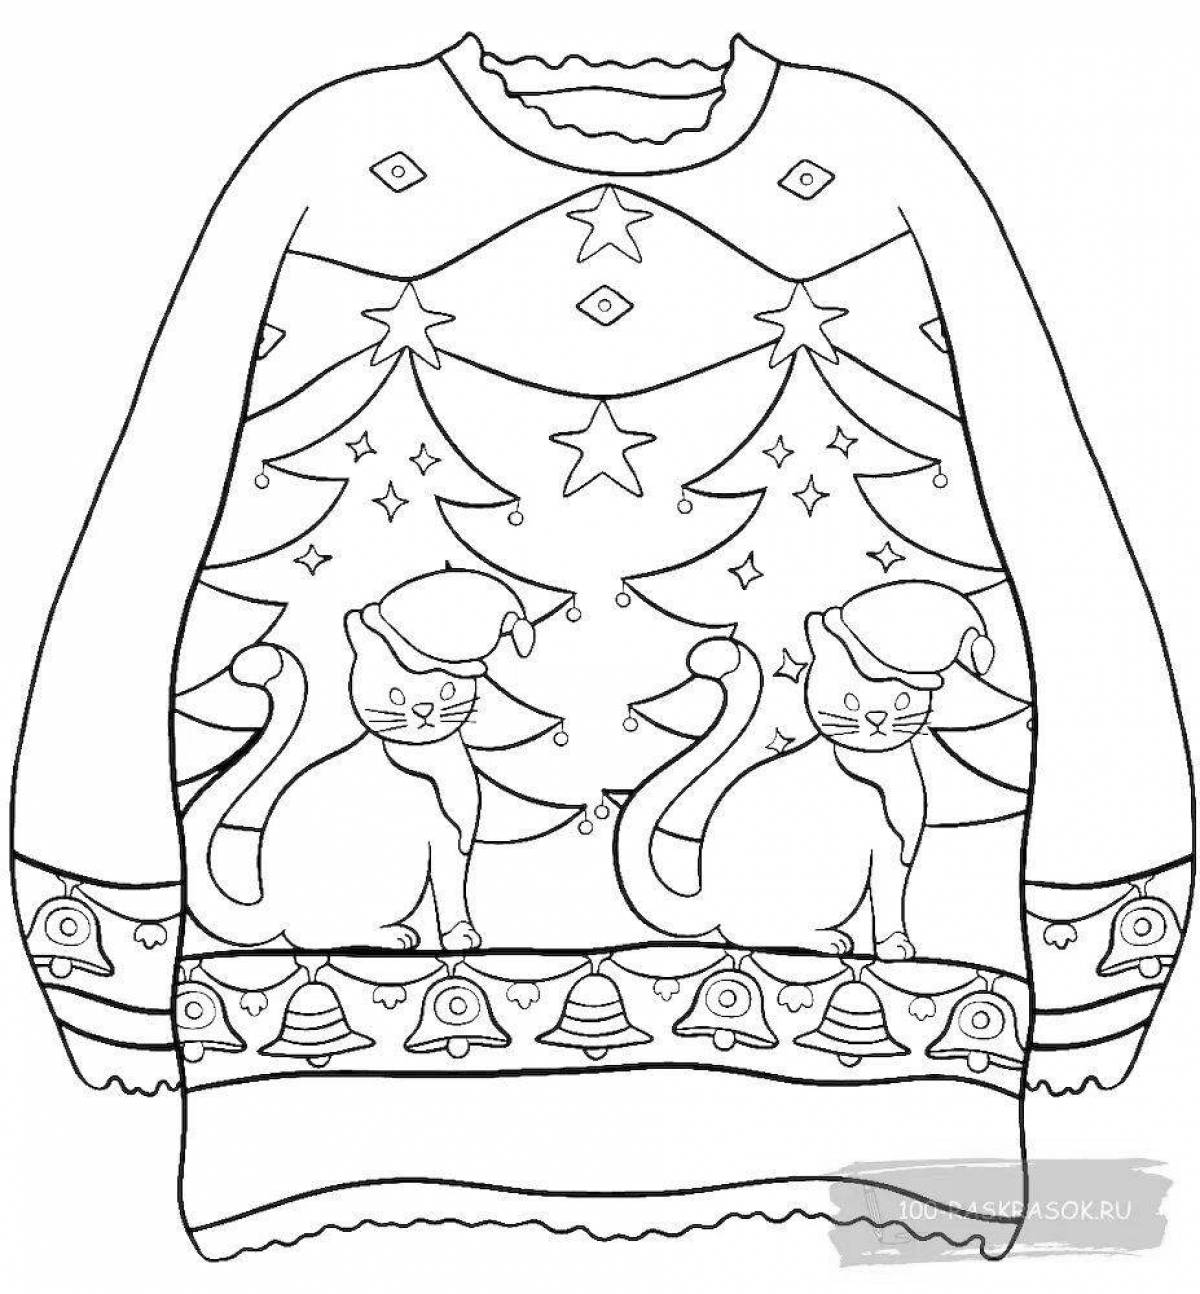 Color-riot sweater coloring page for kids